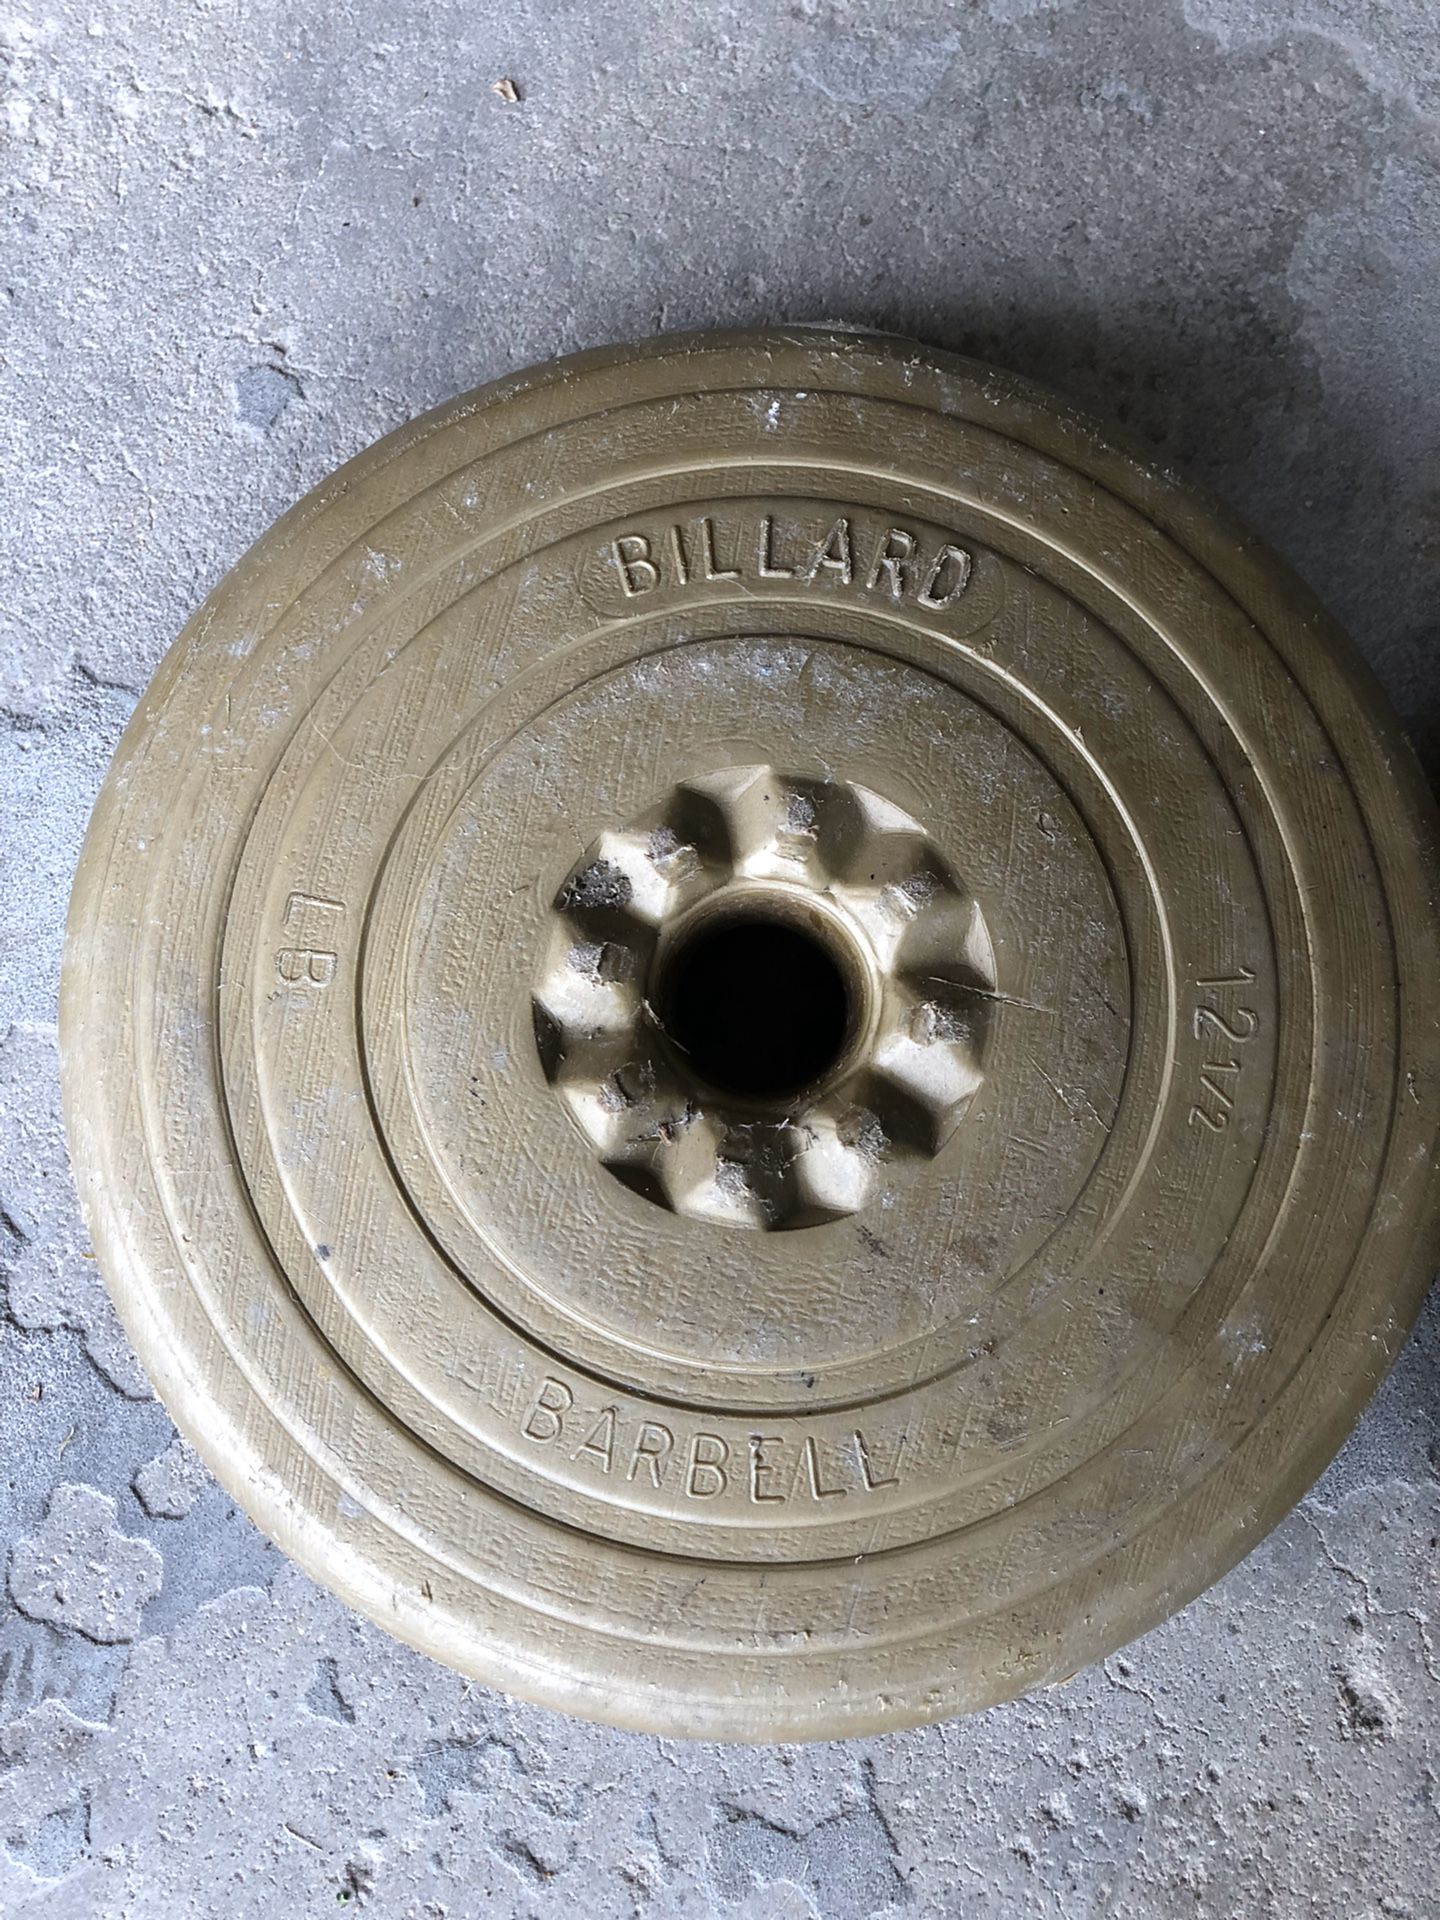 Billard barbell weights a pair of 25 lb weights and 12.5 lbs. 75 total lbs of weight.